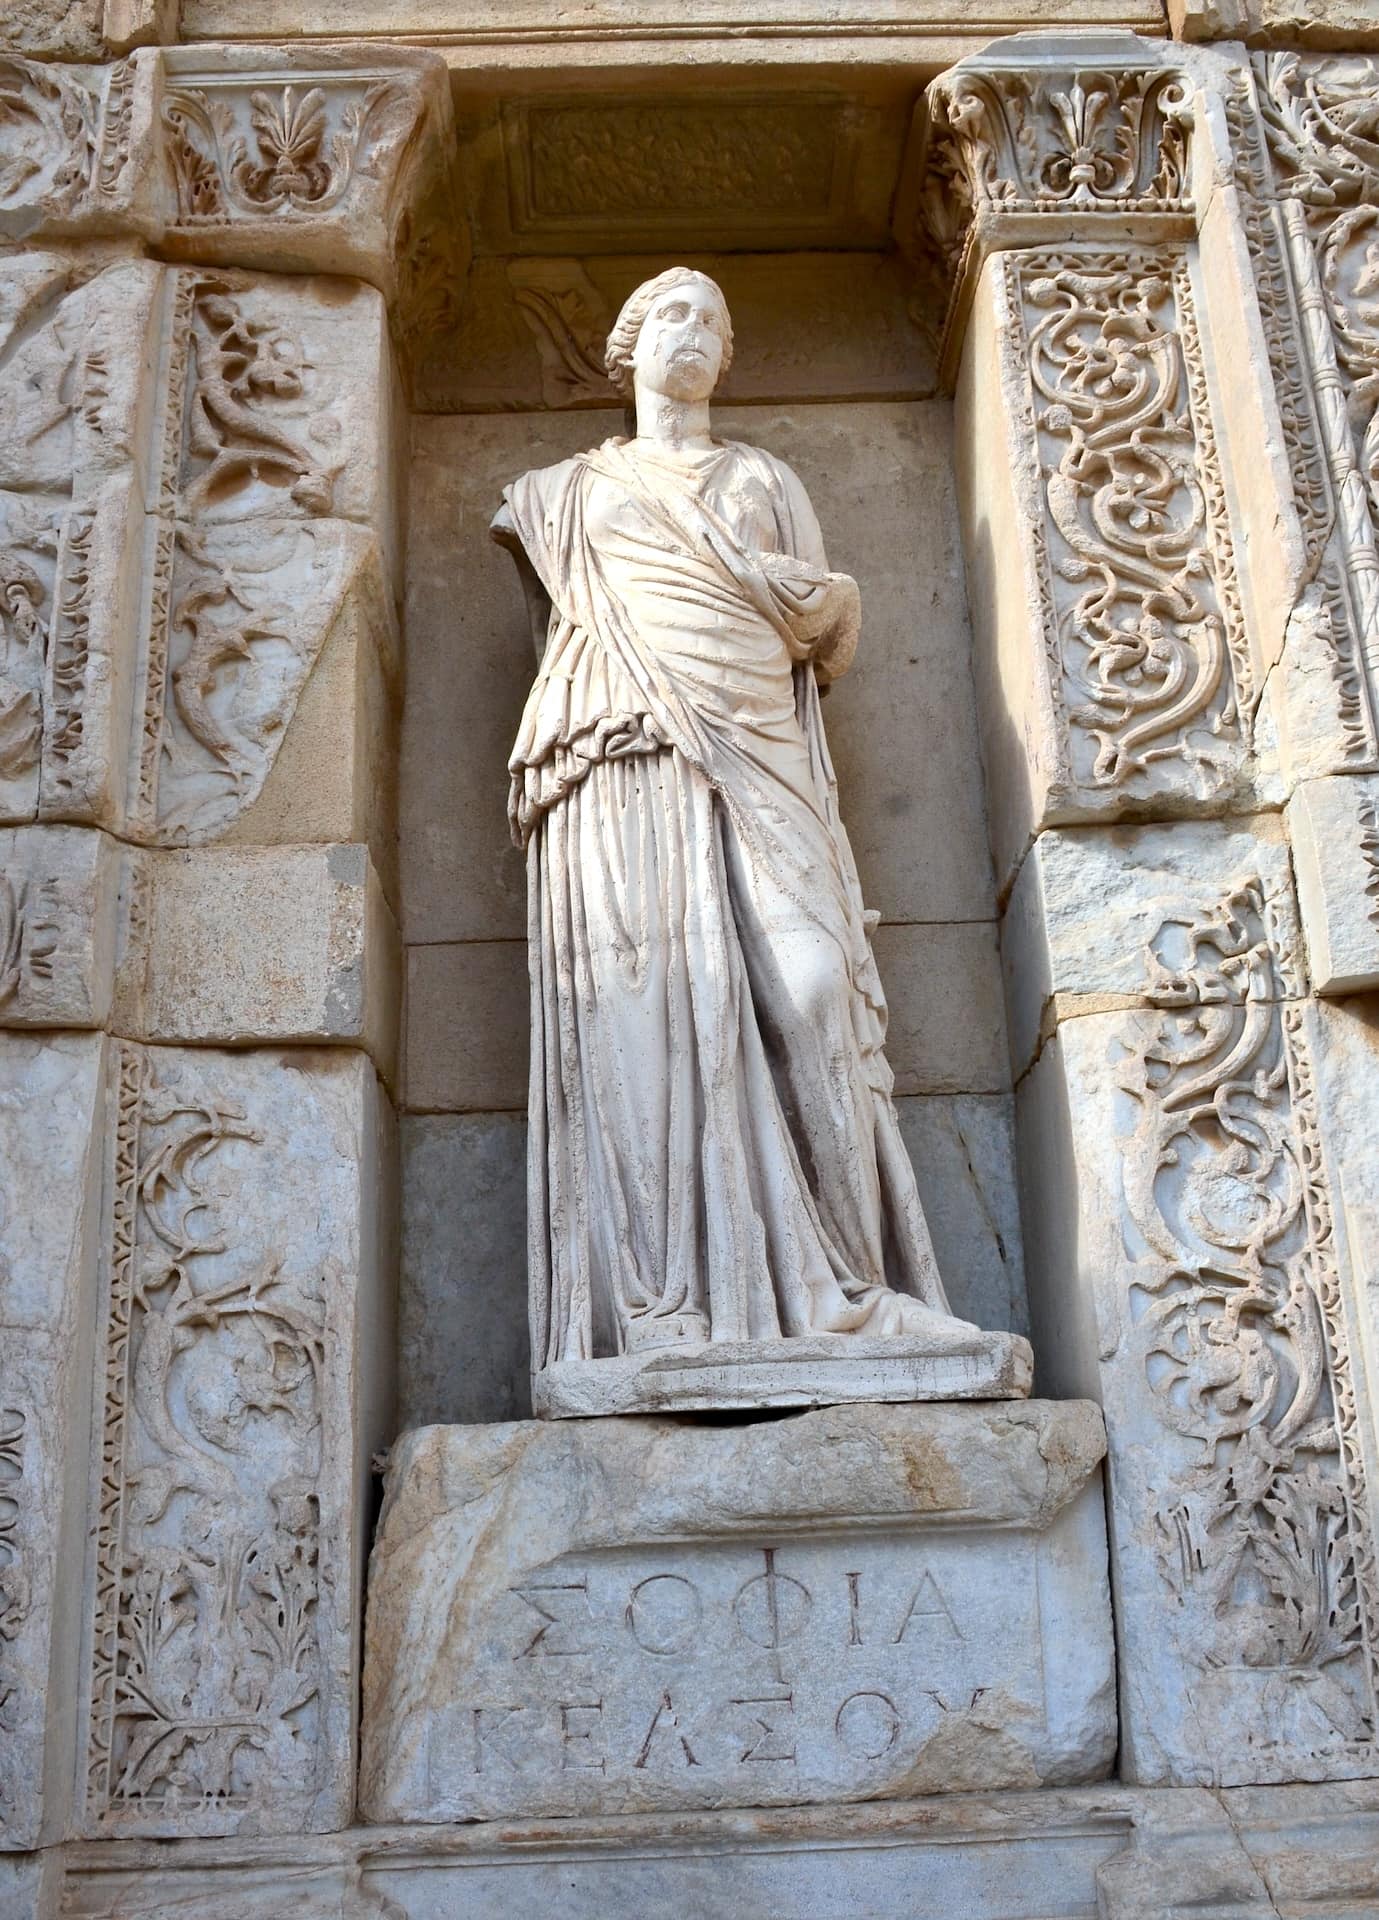 Statue of Sophia on the Library of Celsus at Ephesus